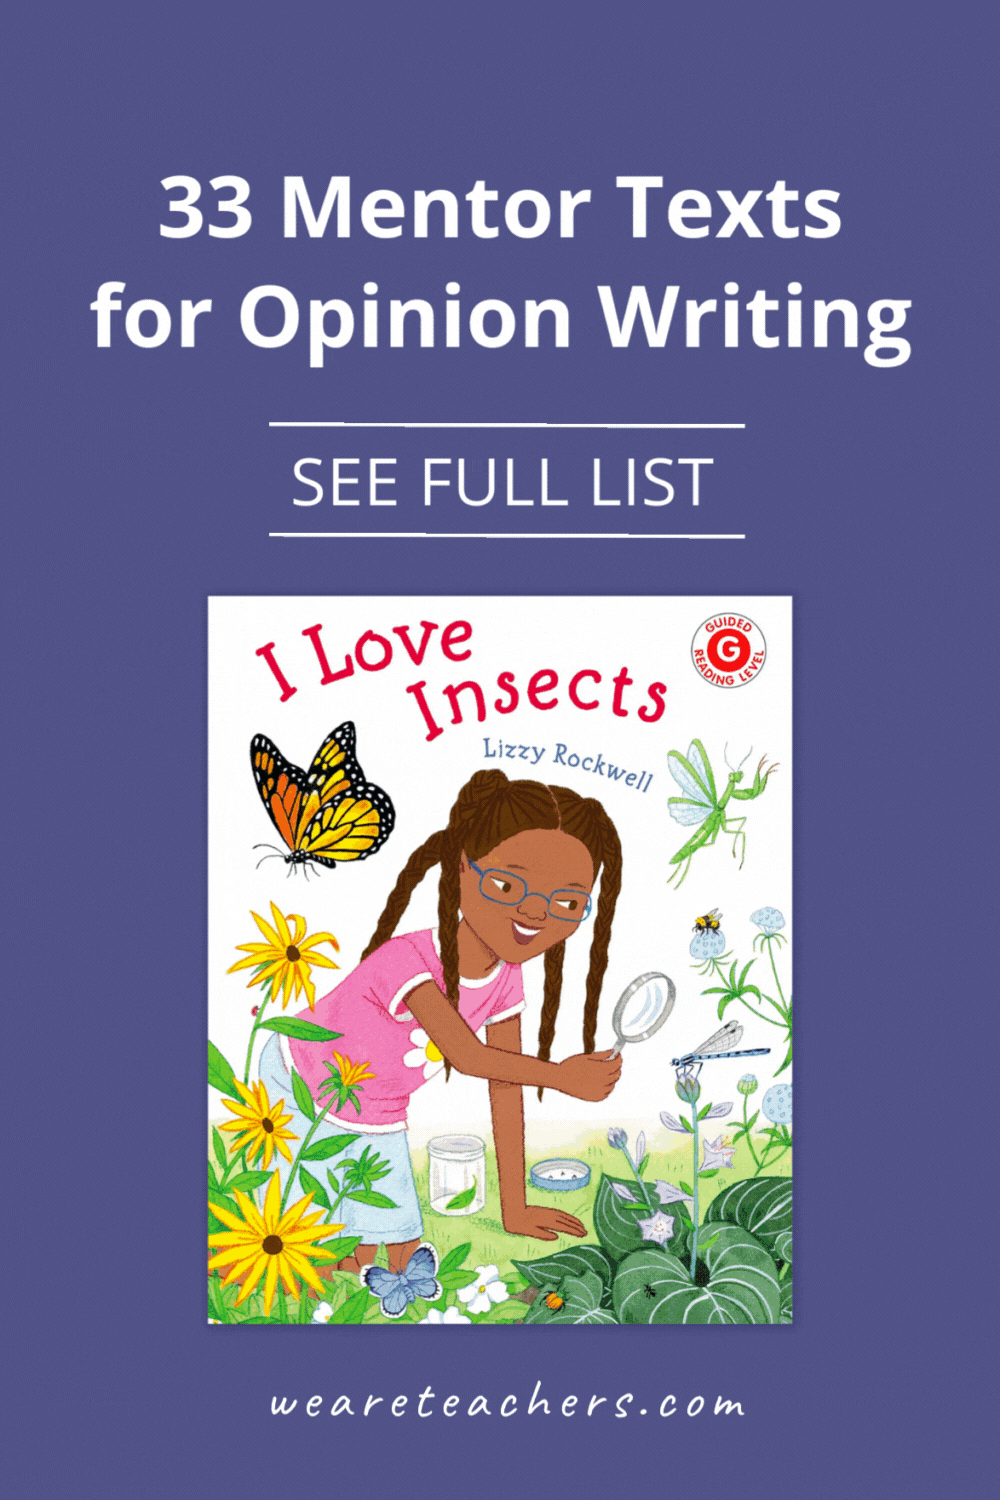 These diverse opinion-writing mentor texts will help students see all the possibilities for sharing their opinions in writing.